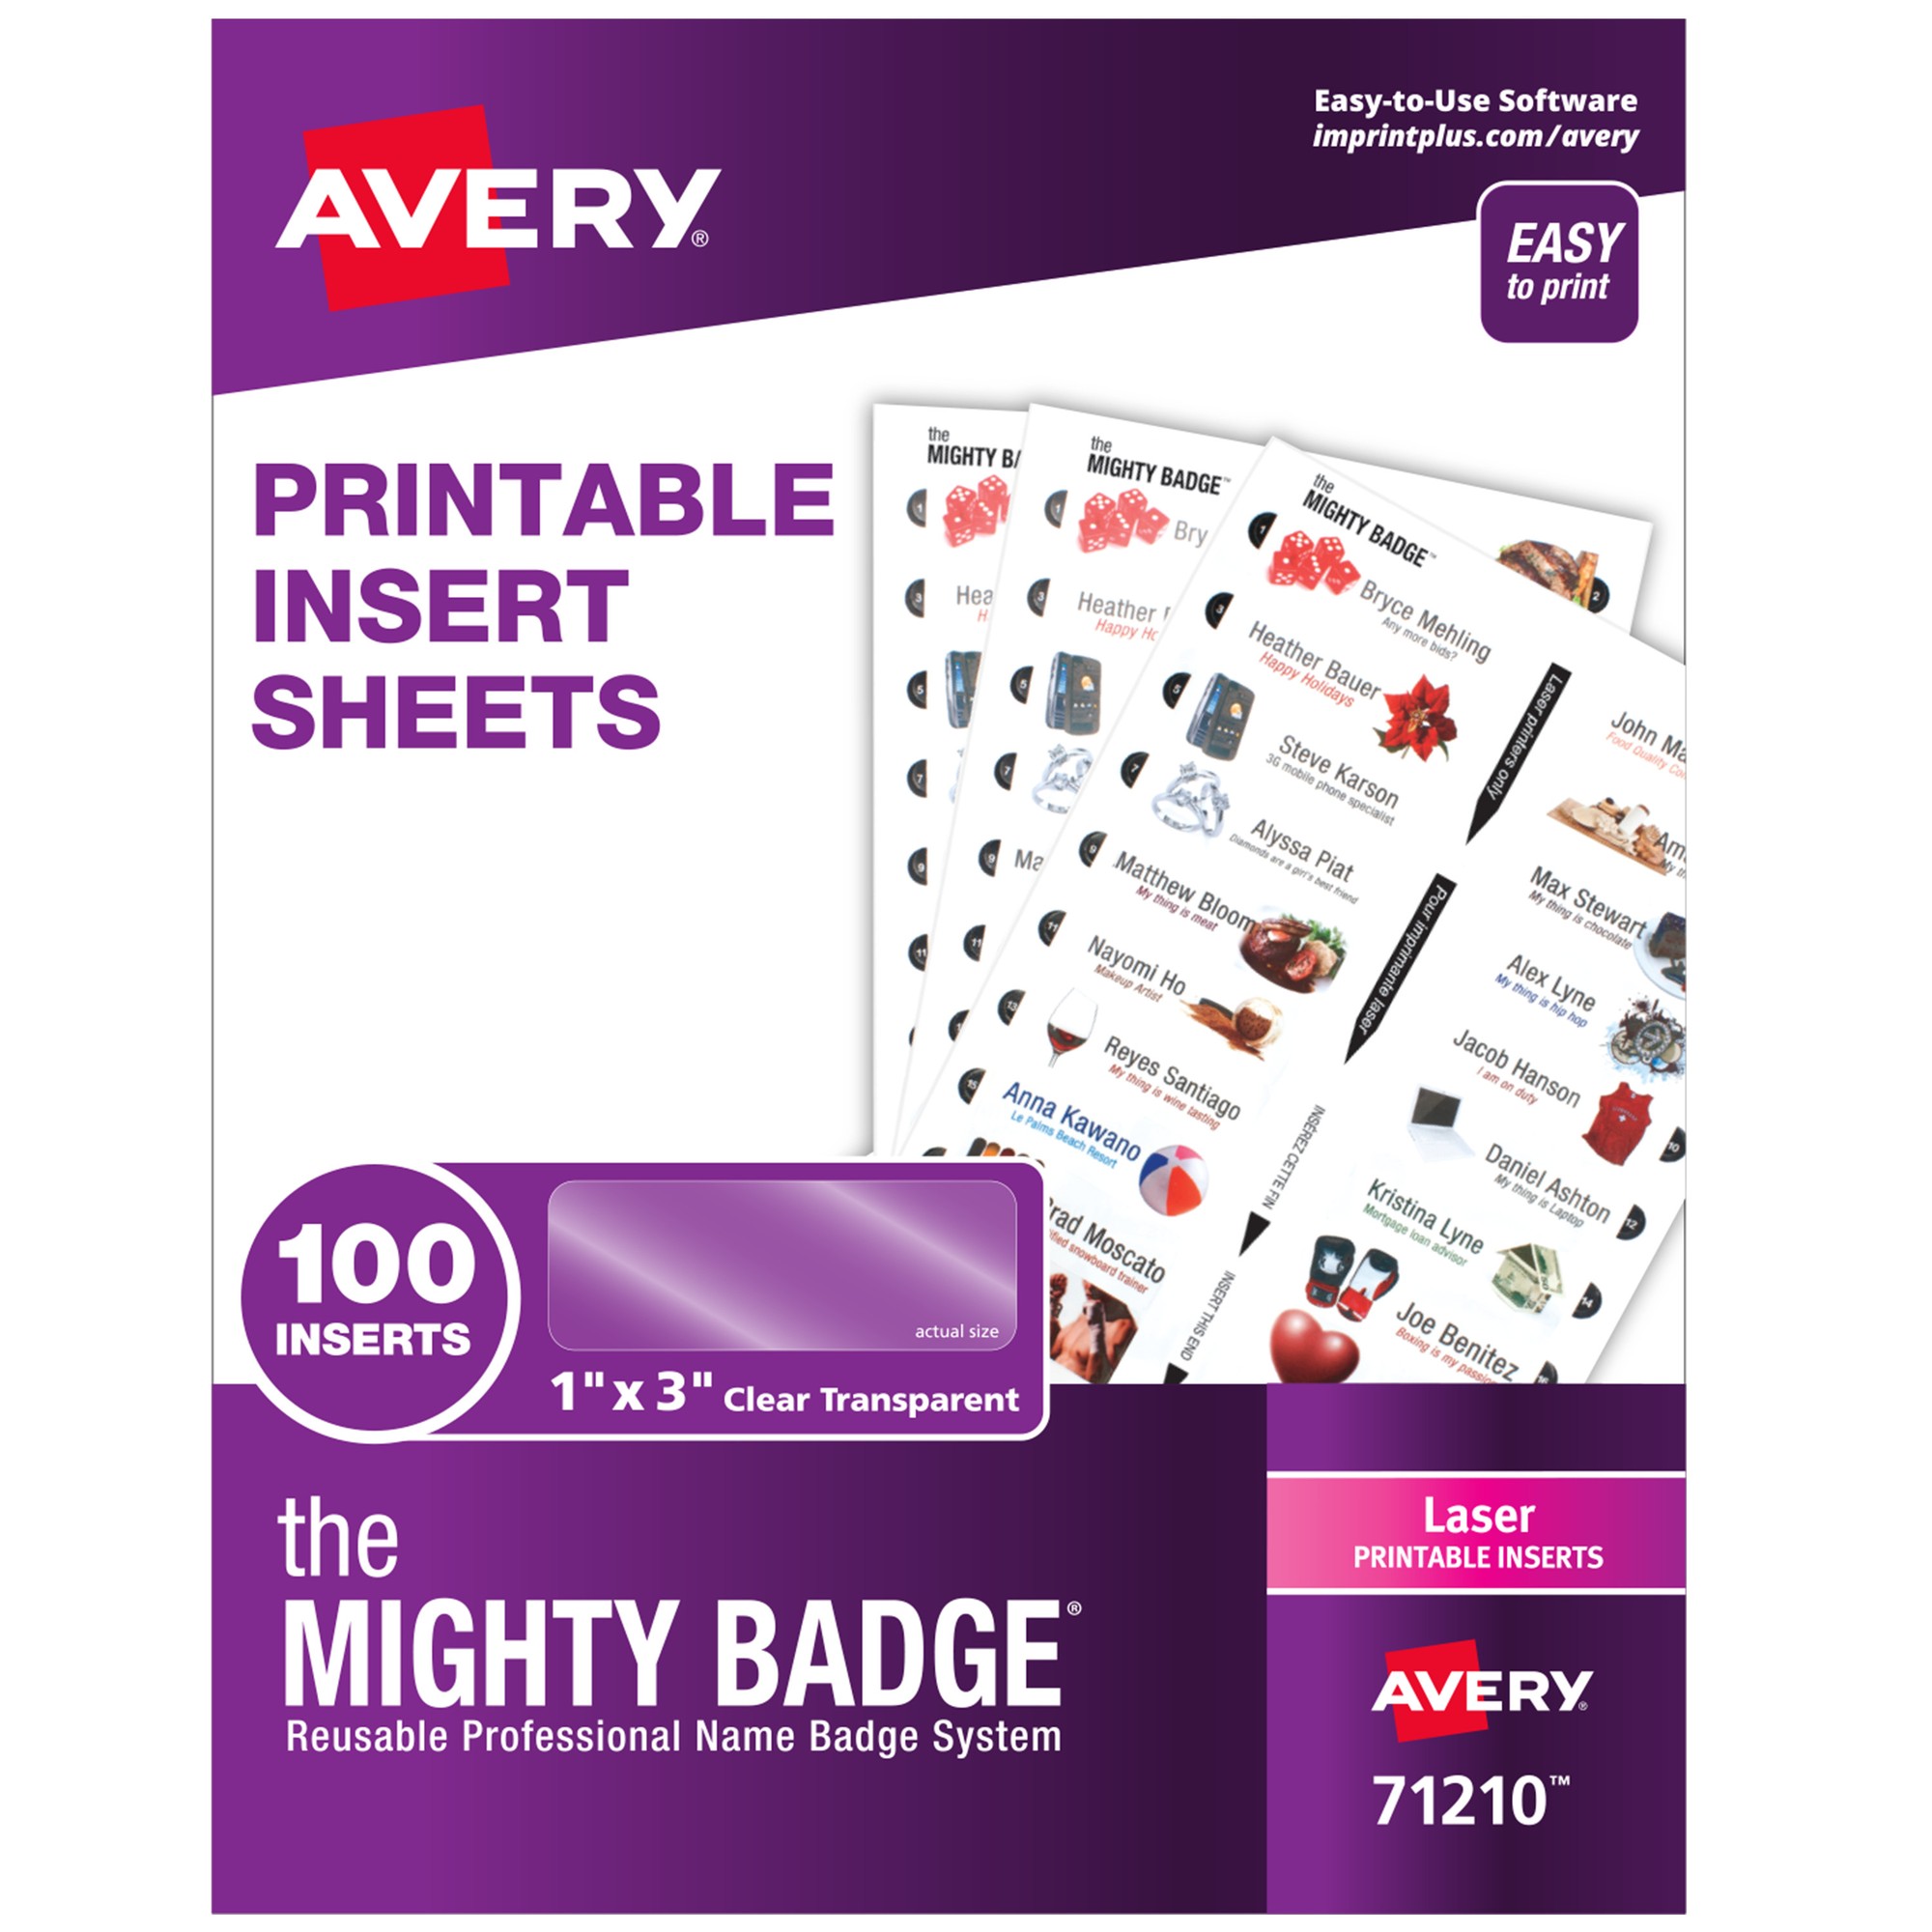 The Mighty Badge The Mighty Badge Printable Insert Sheets, 100 Clear Inserts, Laser - 1" x 3" - 100 / Pack - Printable, Non